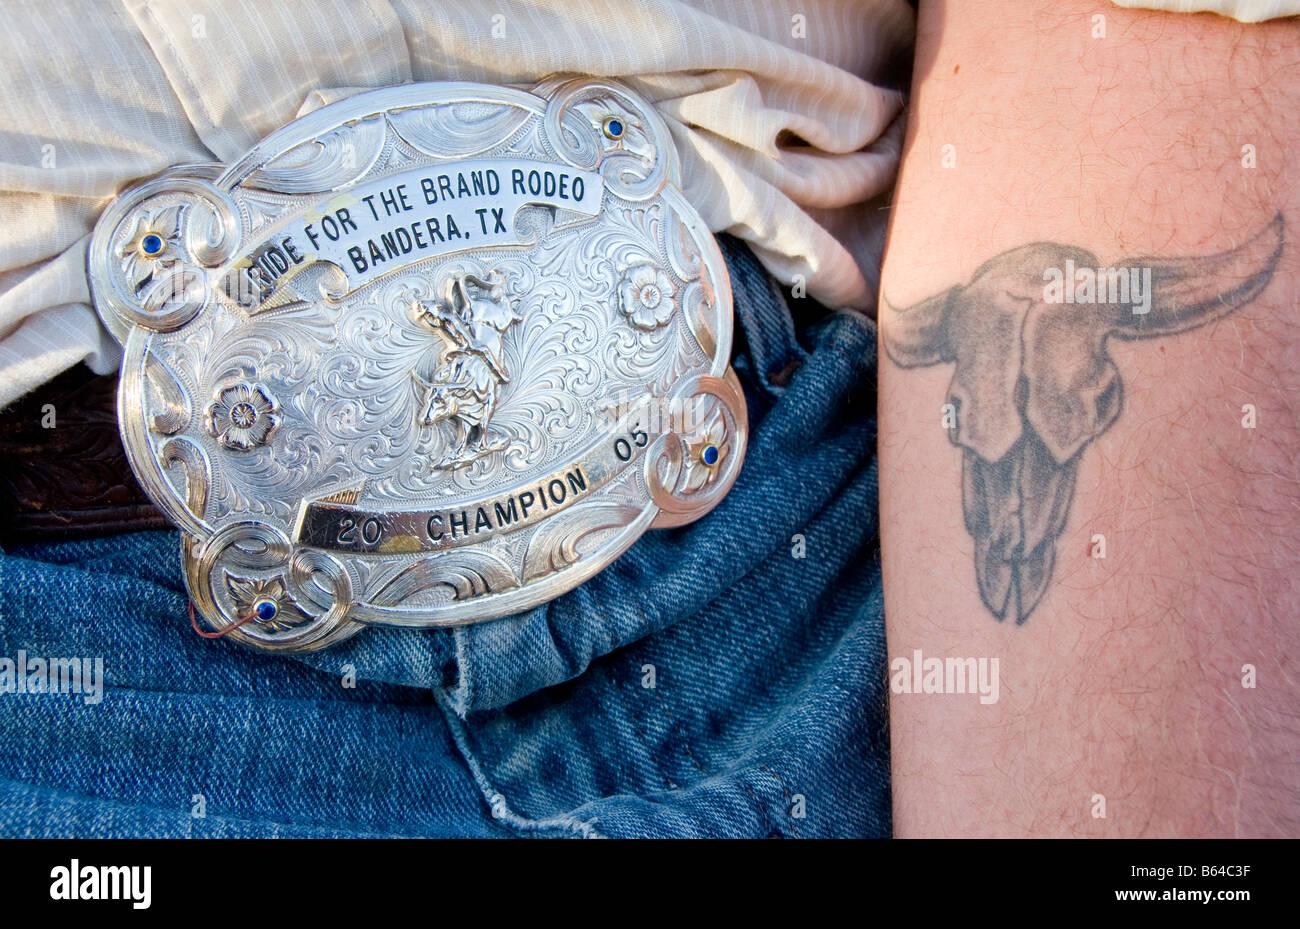 Texas Hill Country, Dixie Dude Ranch, rodeo cowboy's belt buckle and tattoo Stock Photo